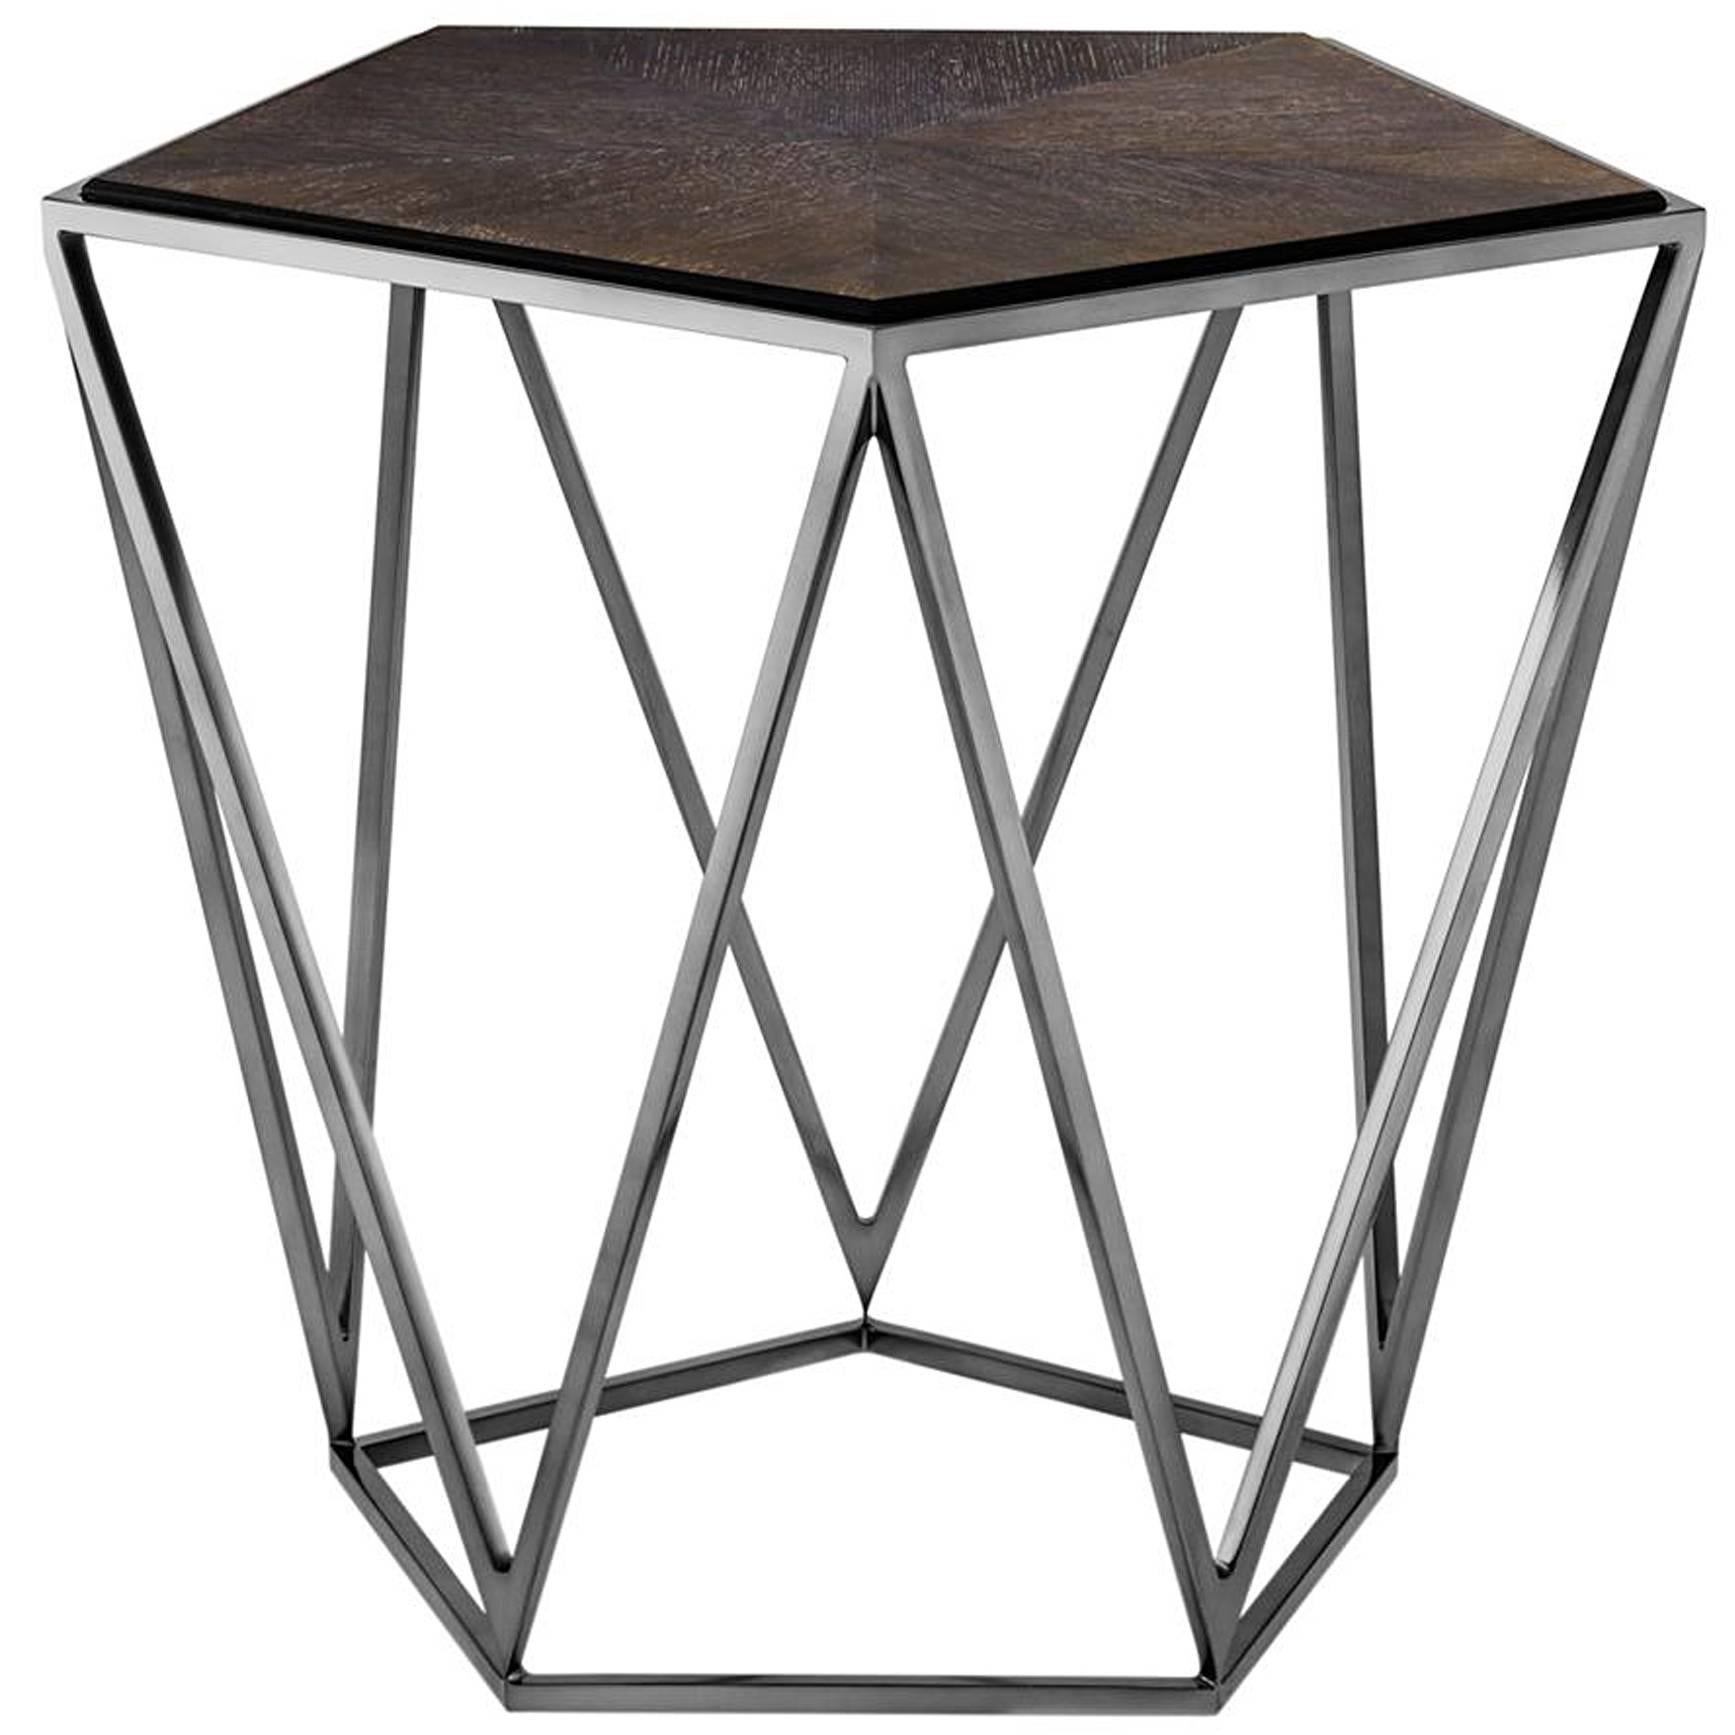 Penta Side Table with Charcoal Oak Top and Black Nickel Finish